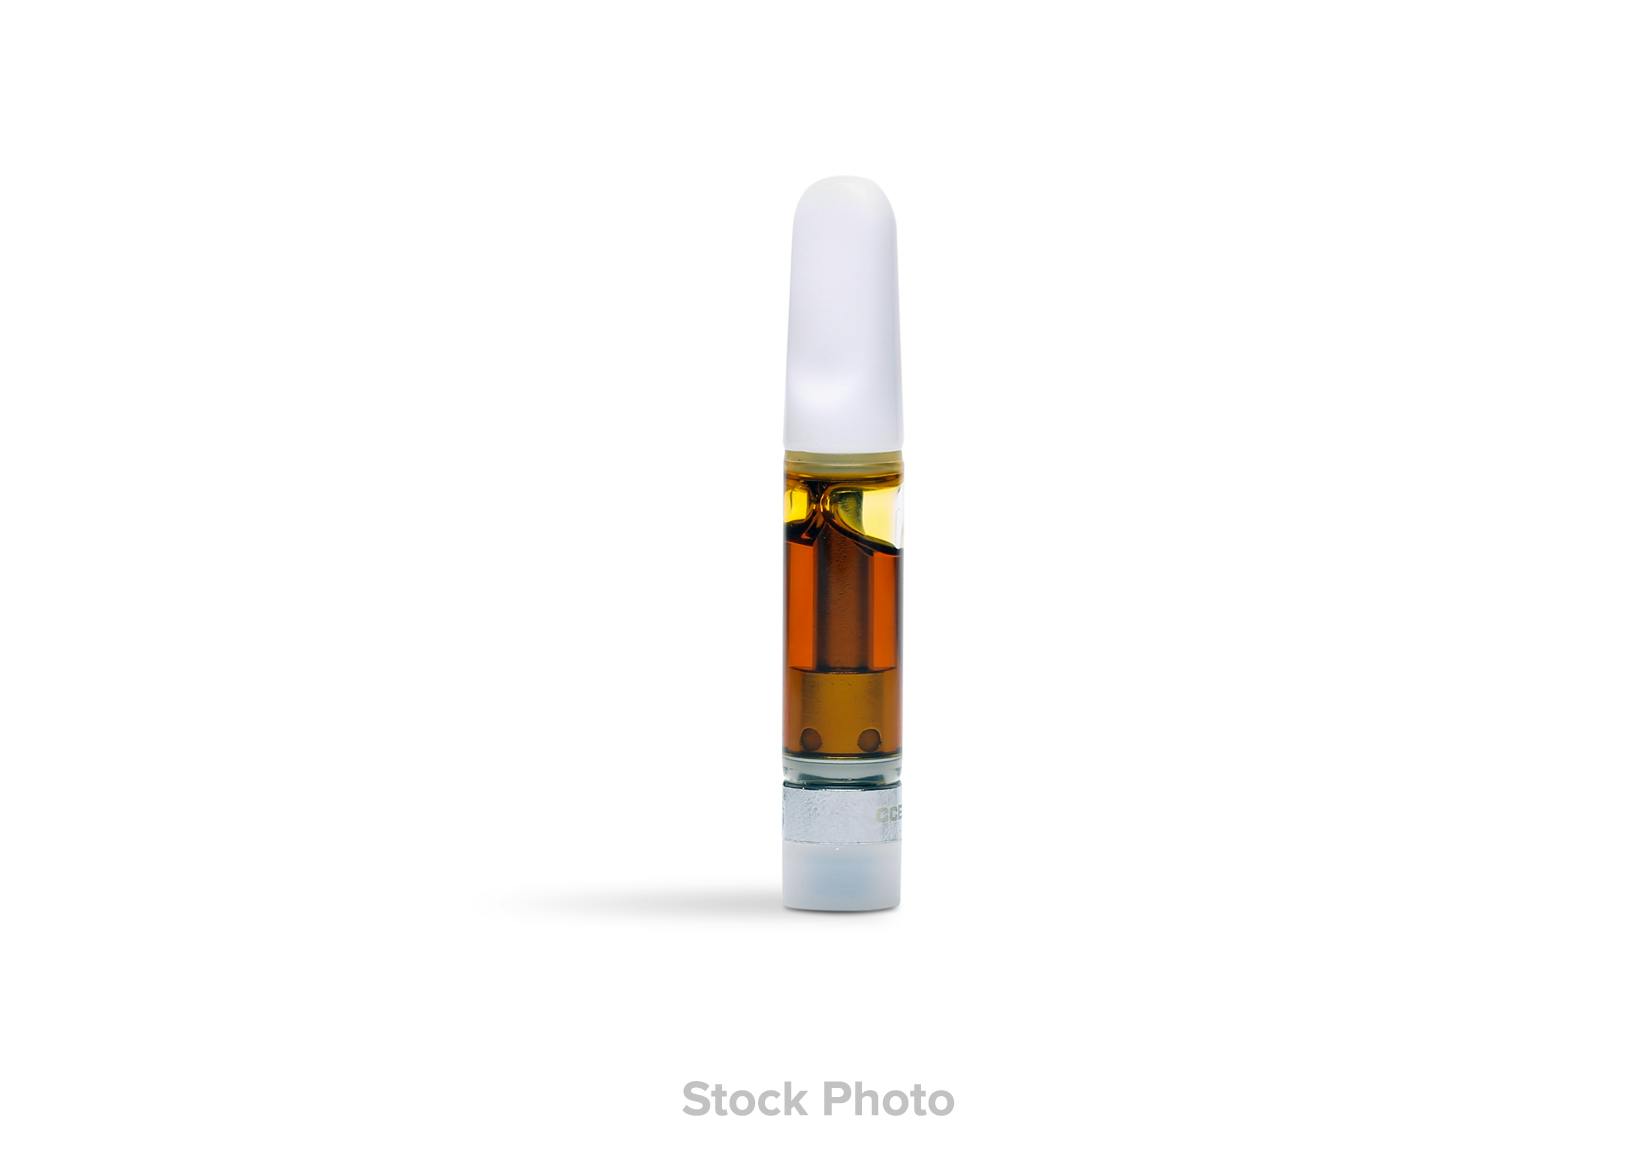 Parks and Rec: Pineapple - Distillate Cartridge